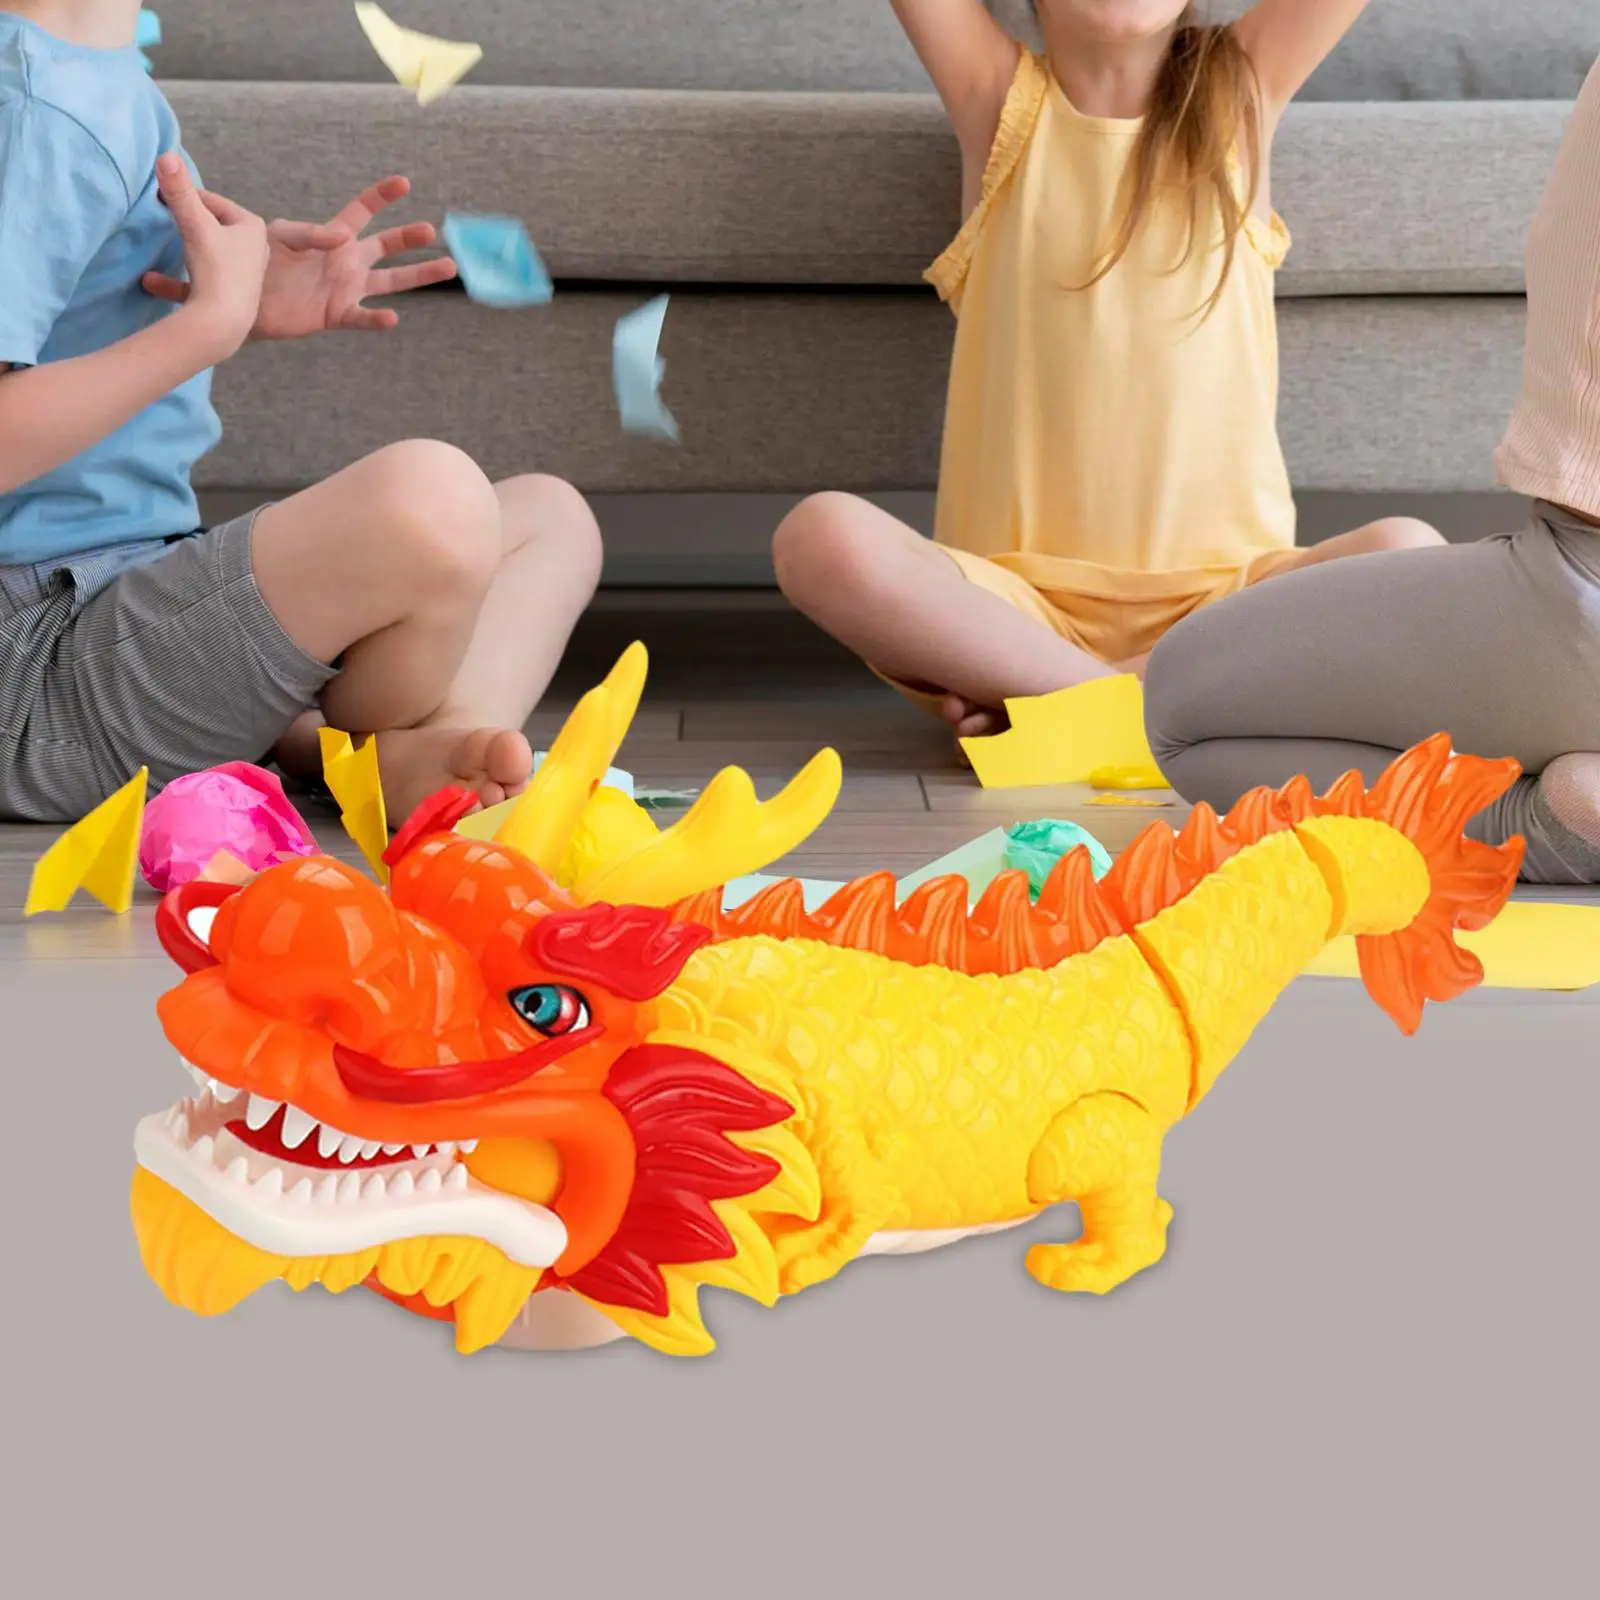 Eletric Dragon Toy Creative Outdoors Walking Educational Learning Infant Toy for Adults 4 5 6 7 8 9 Year Olds Children Kid Boys